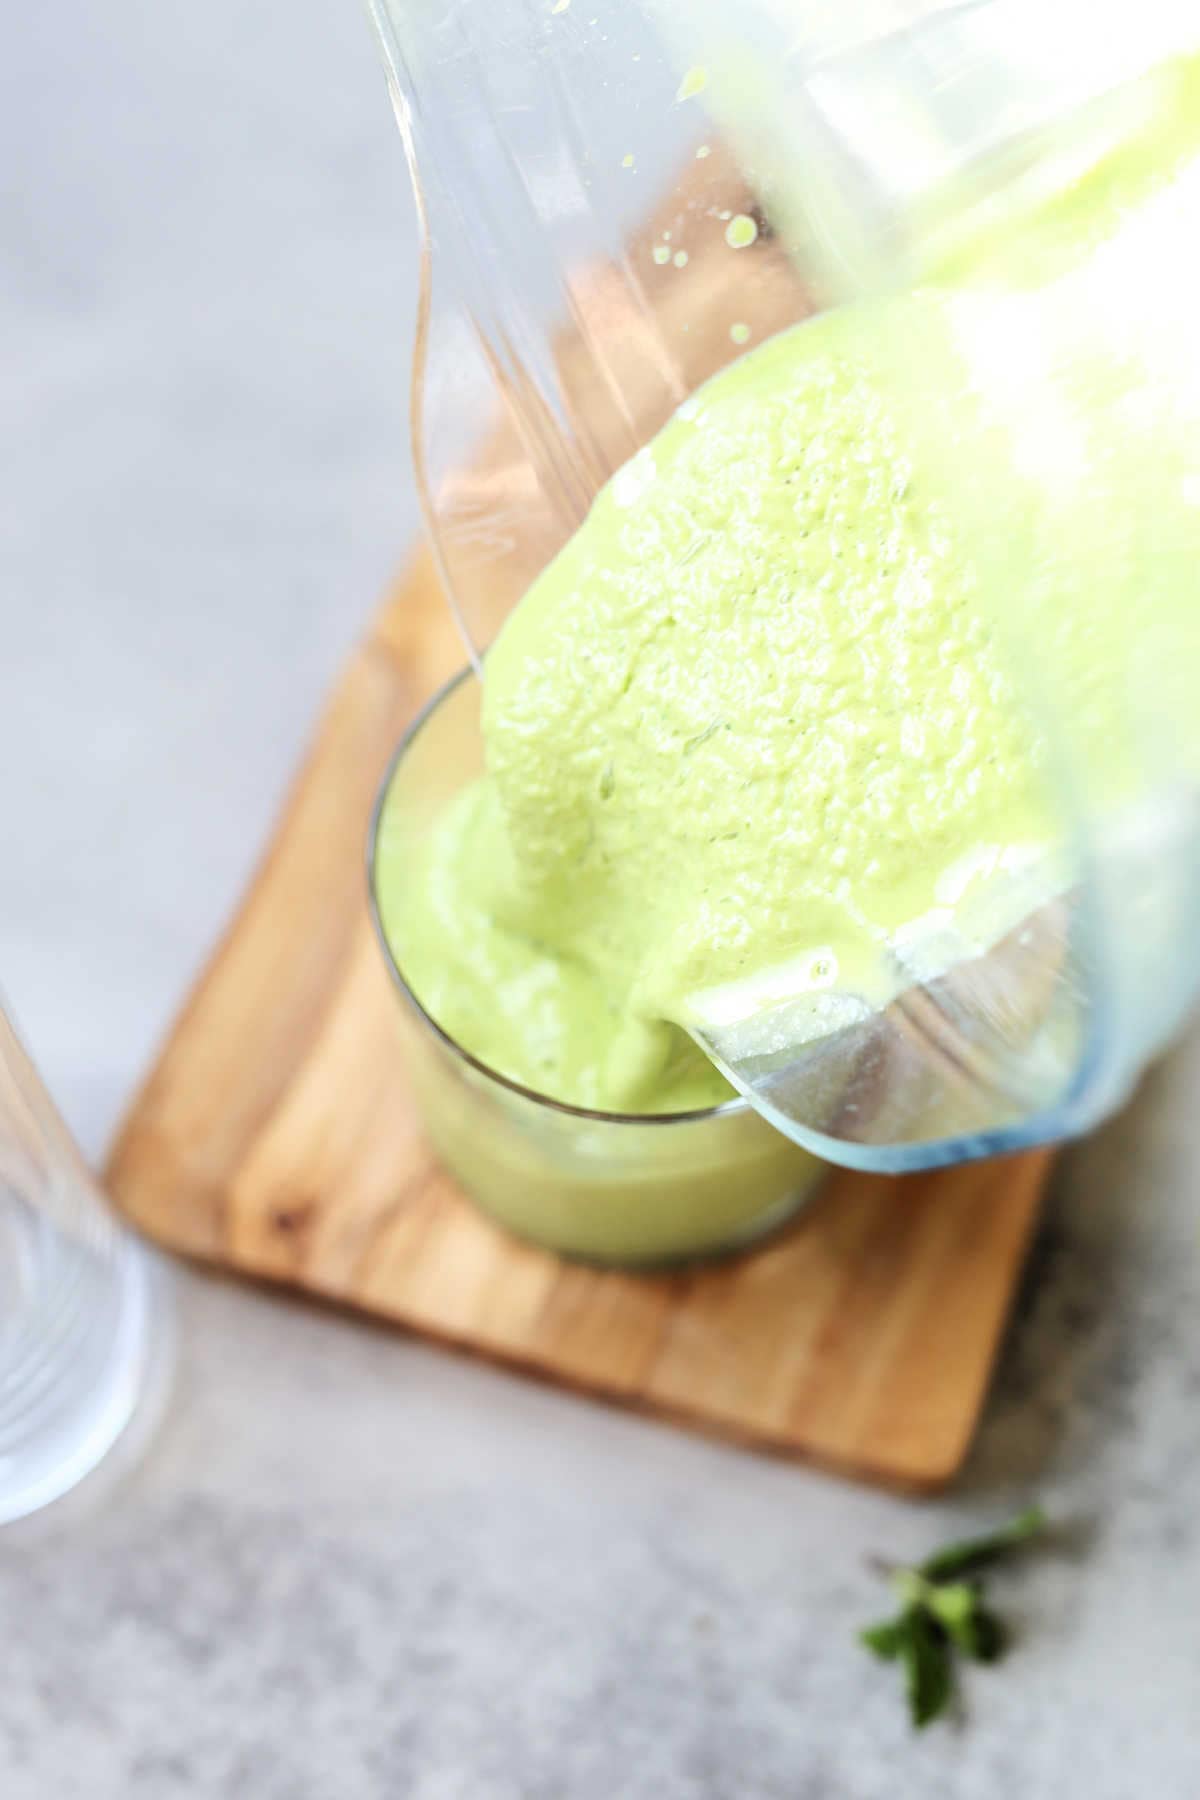 pouring a kale and banana smoothie from a blender into a glass